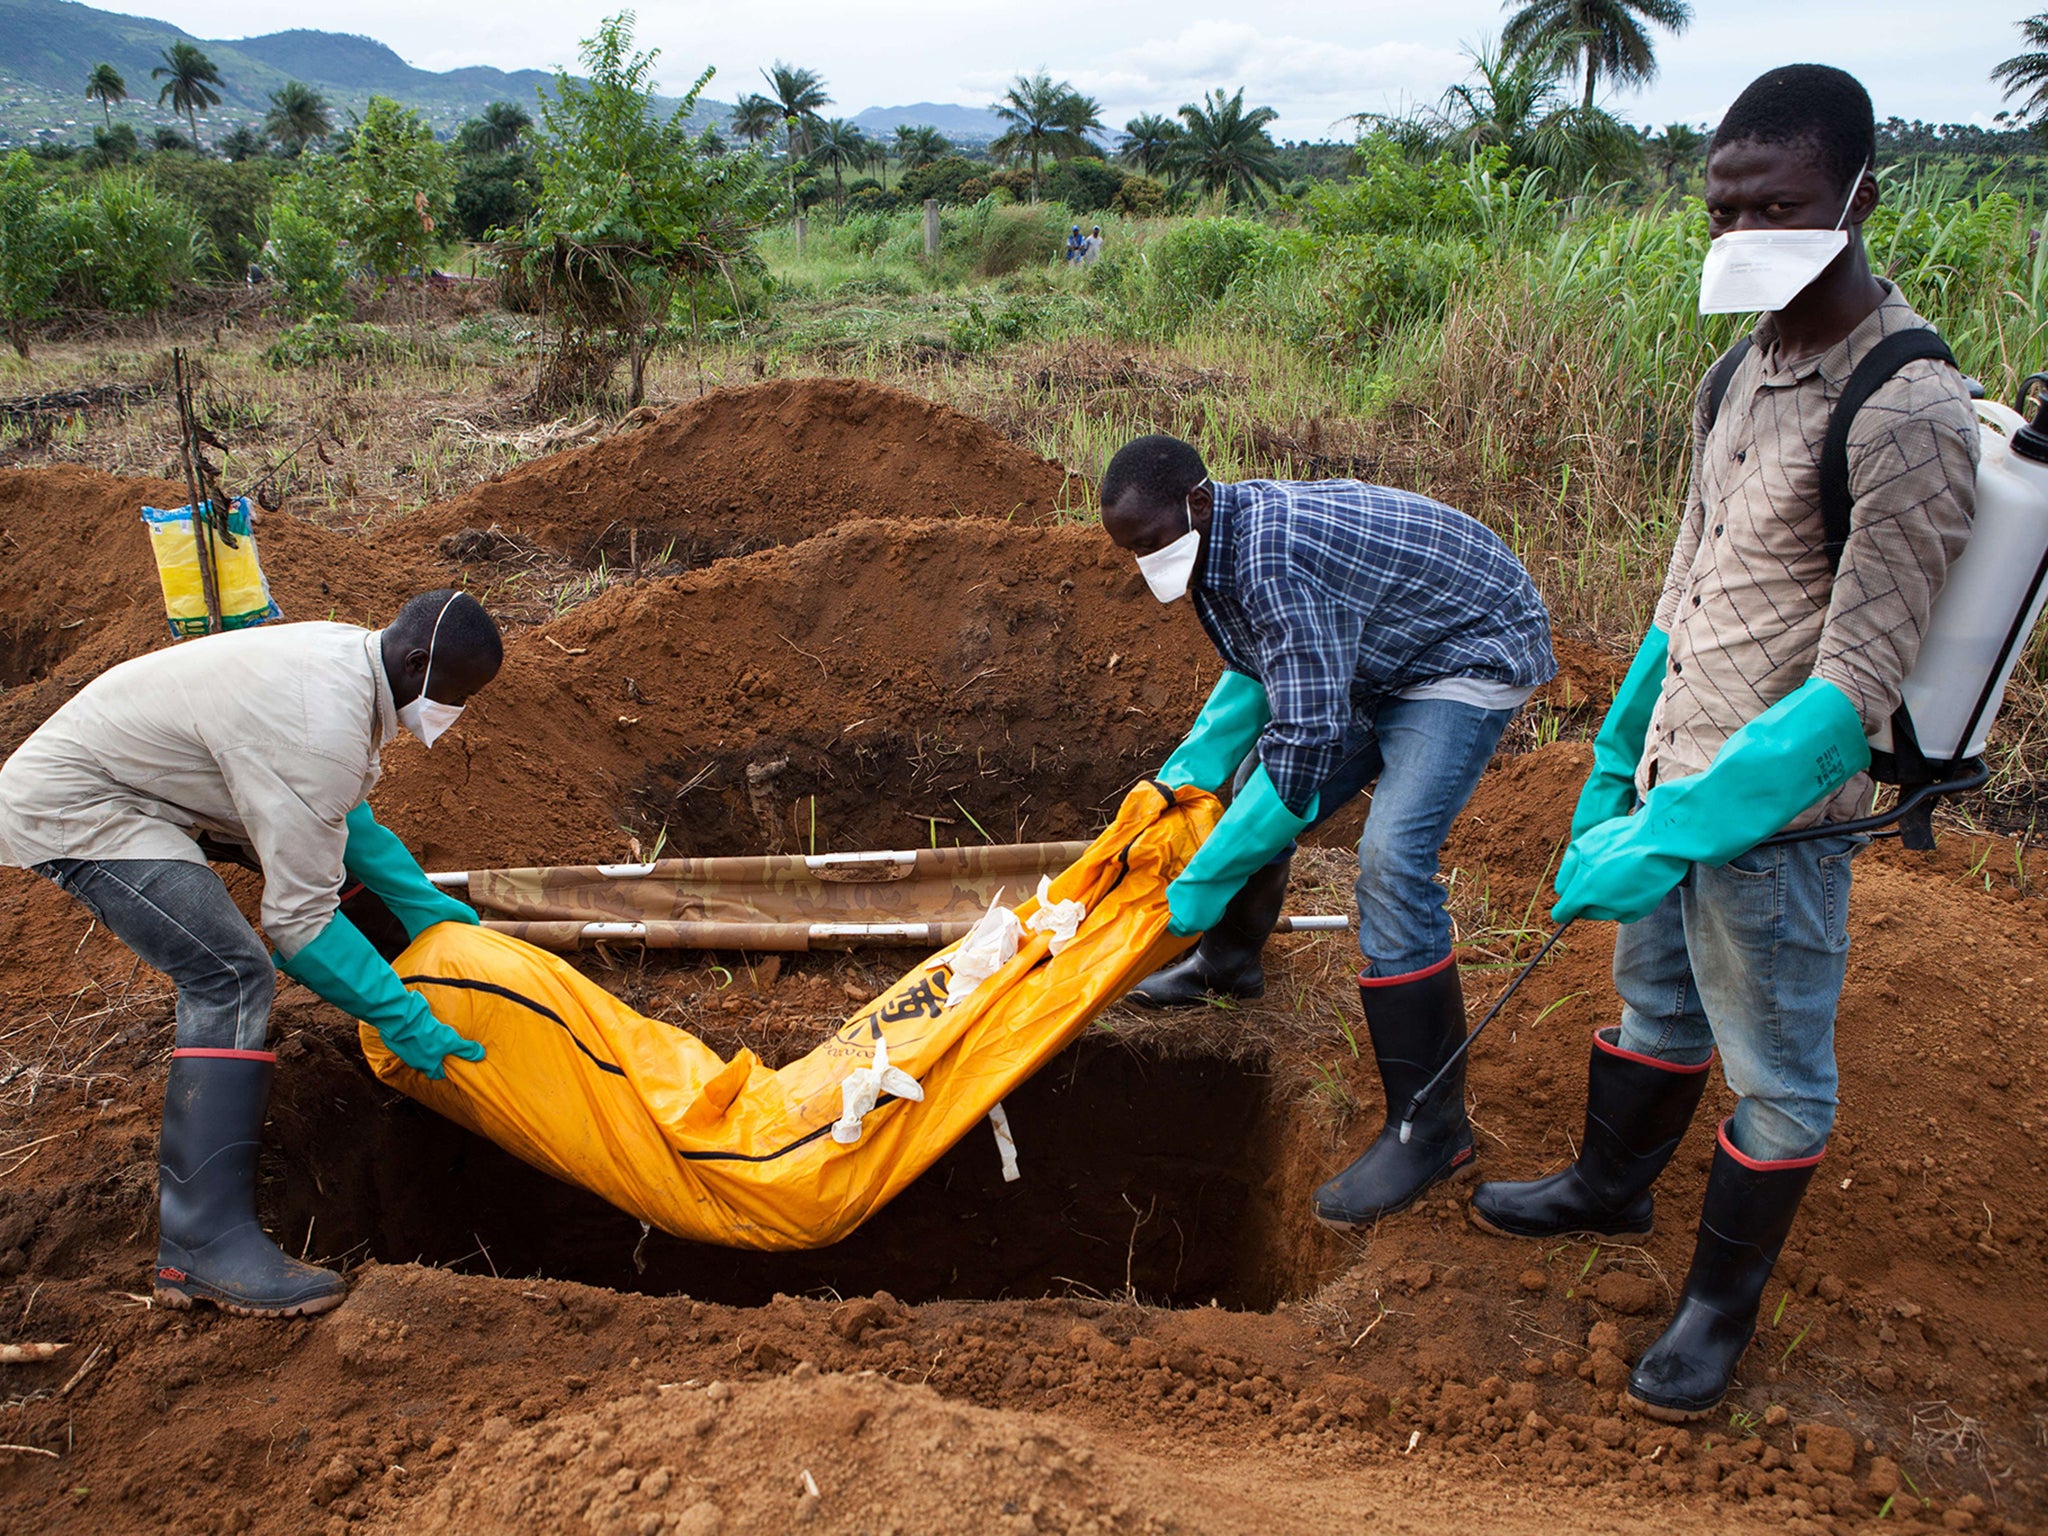 Volunteers in protective suit bury the body of a person who died from Ebola in Waterloo, Sierra Leone, some 30 kilometers southeast of Freetown